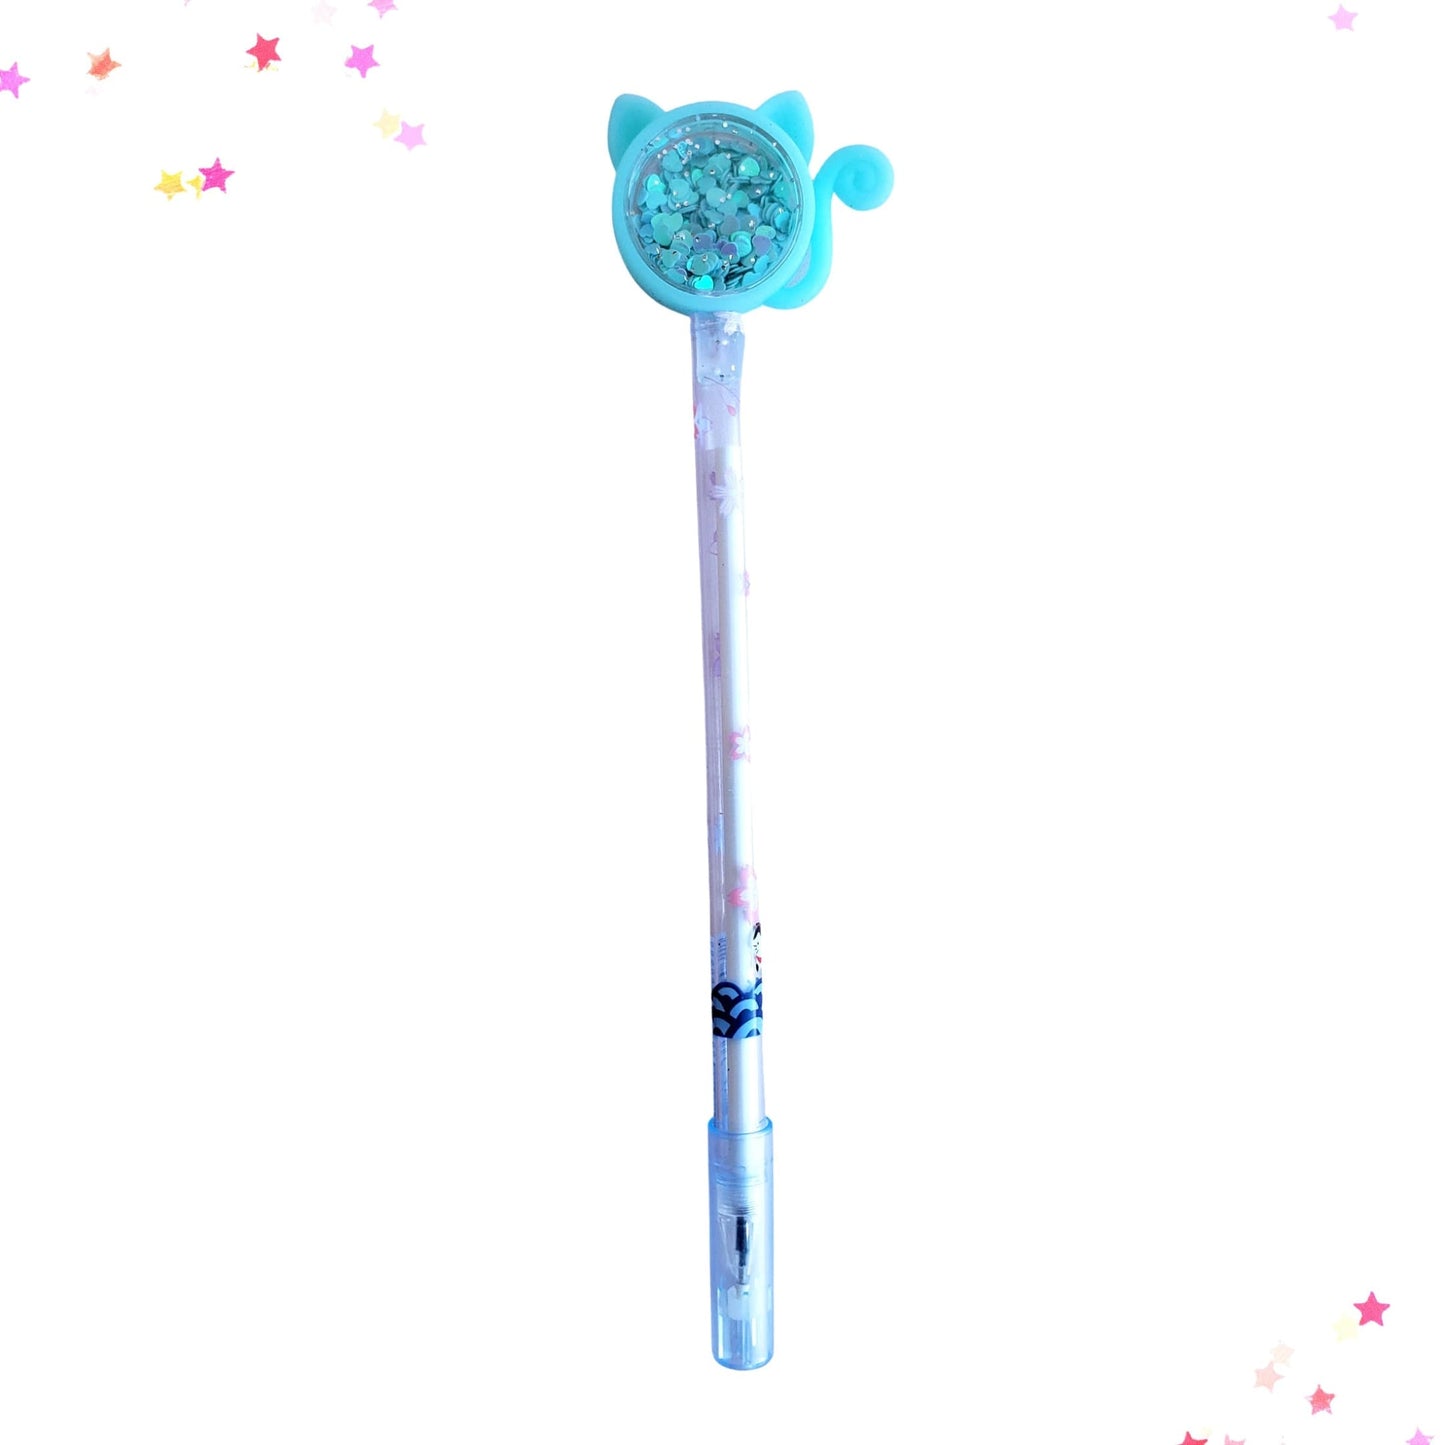 Cat-Shaped Sequin Shaker Gel Pen in Blue from Confetti Kitty, Only 2.99